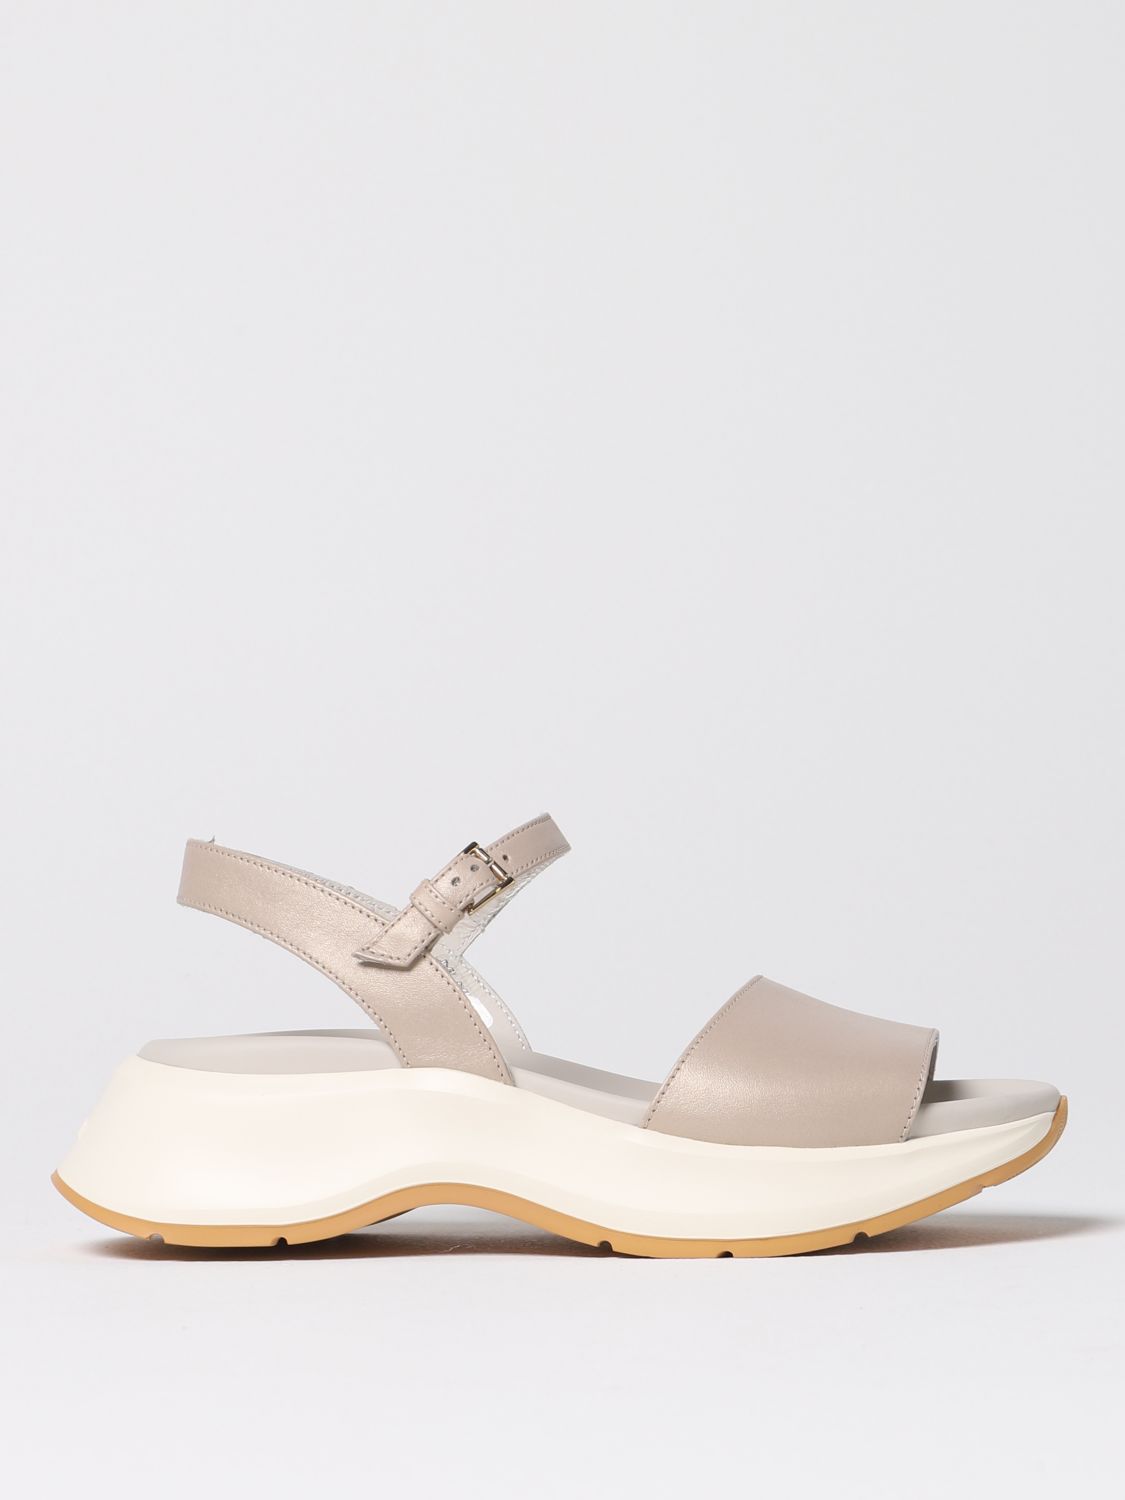 HOGAN H598 SANDALS IN LEATHER,E04615022